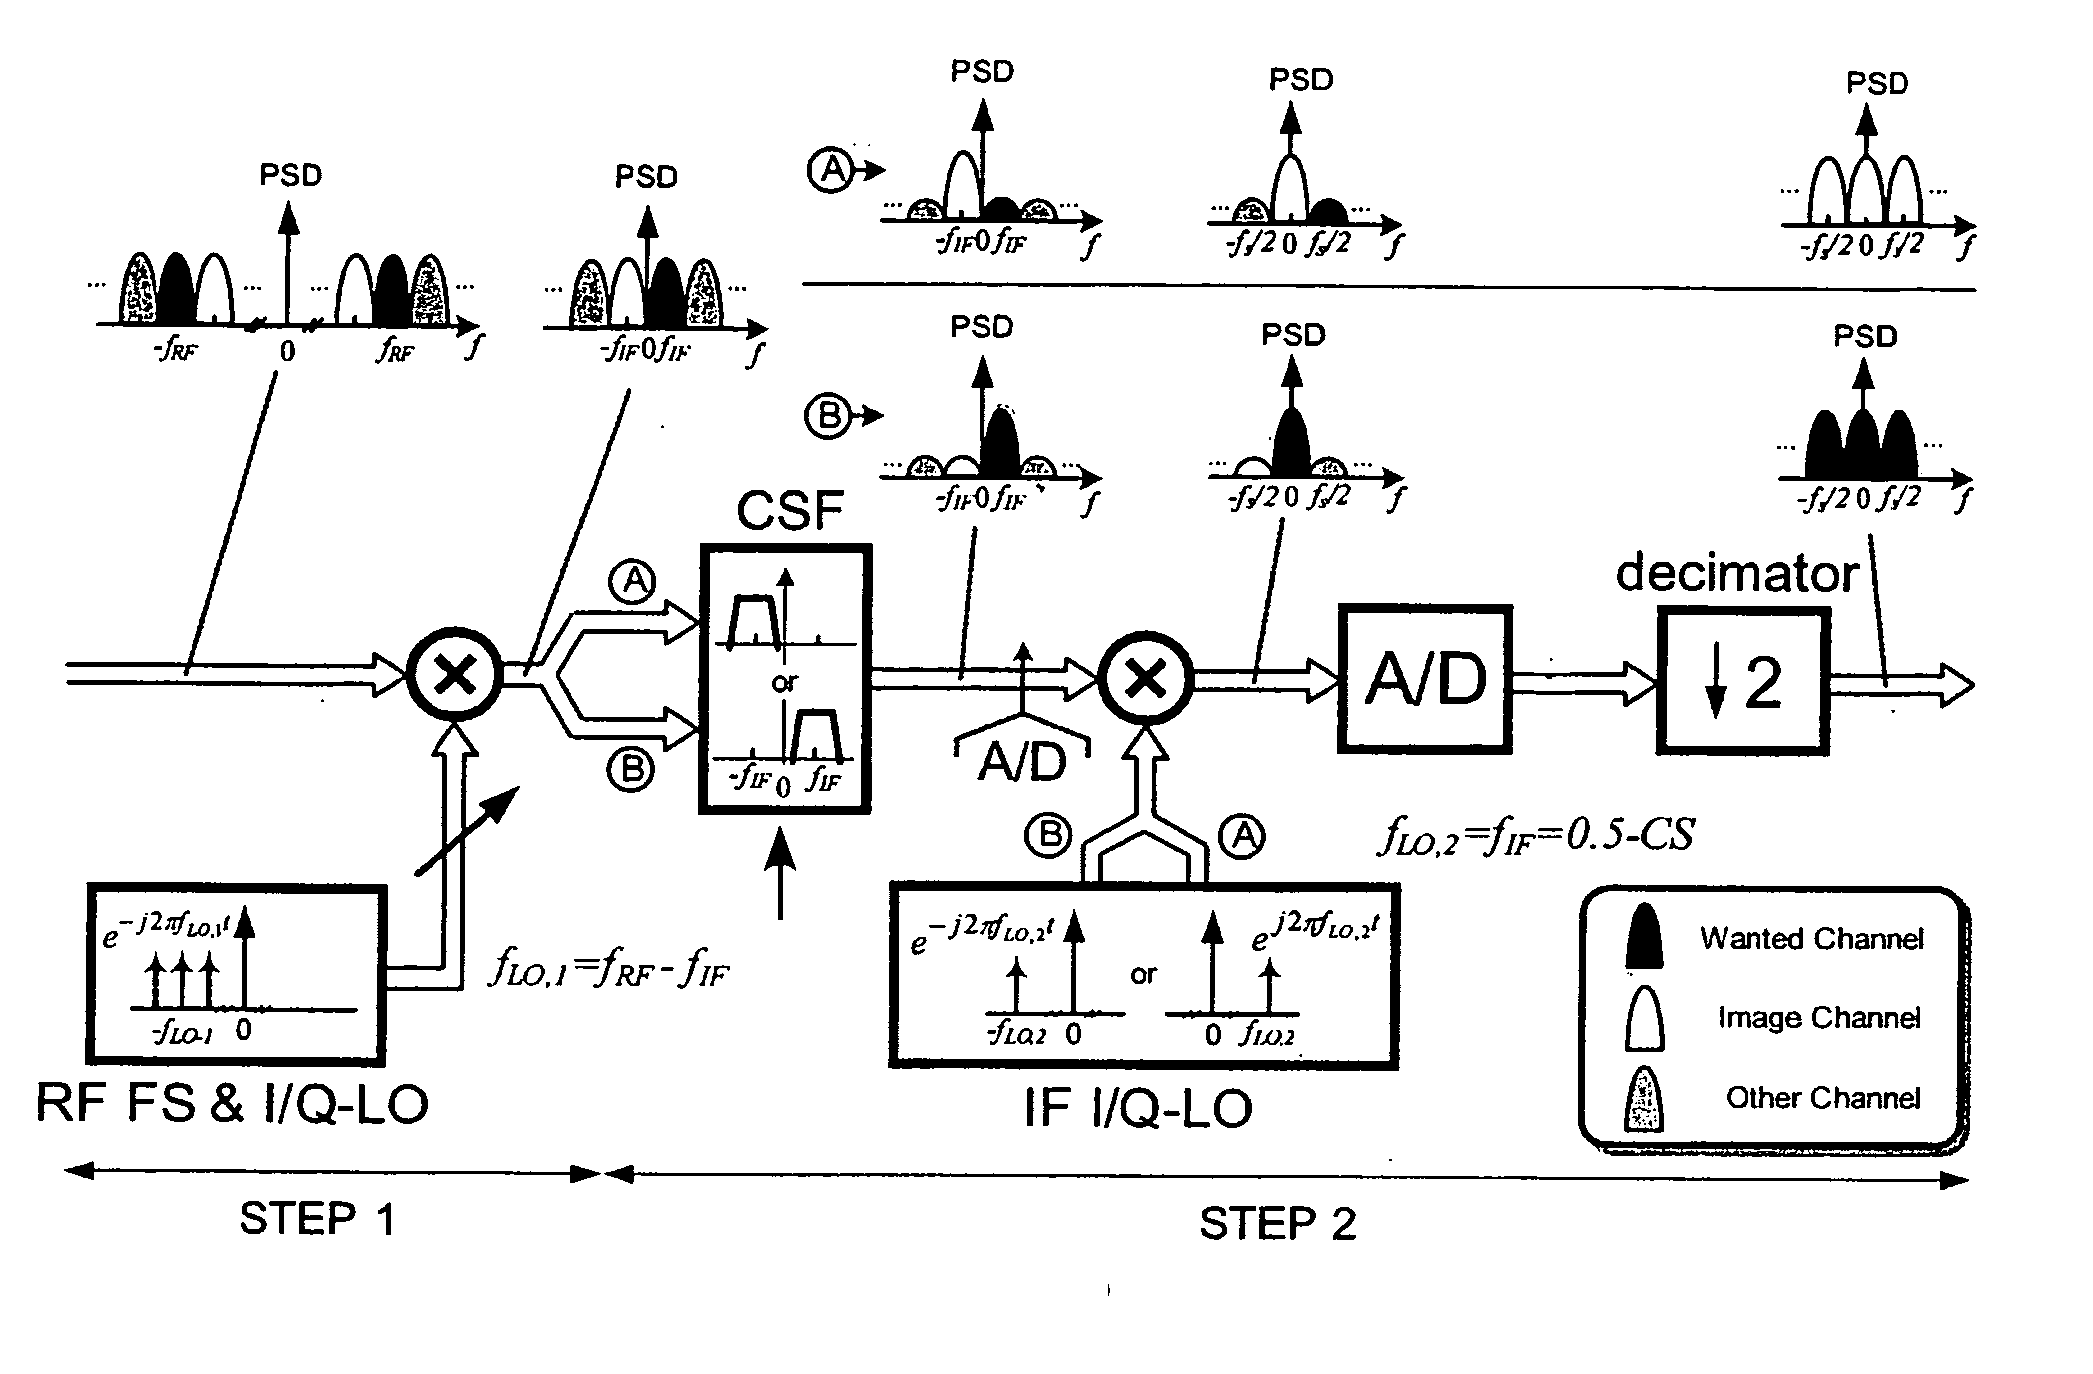 Two-step channel selection for wireless receiver and transmitter front-ends